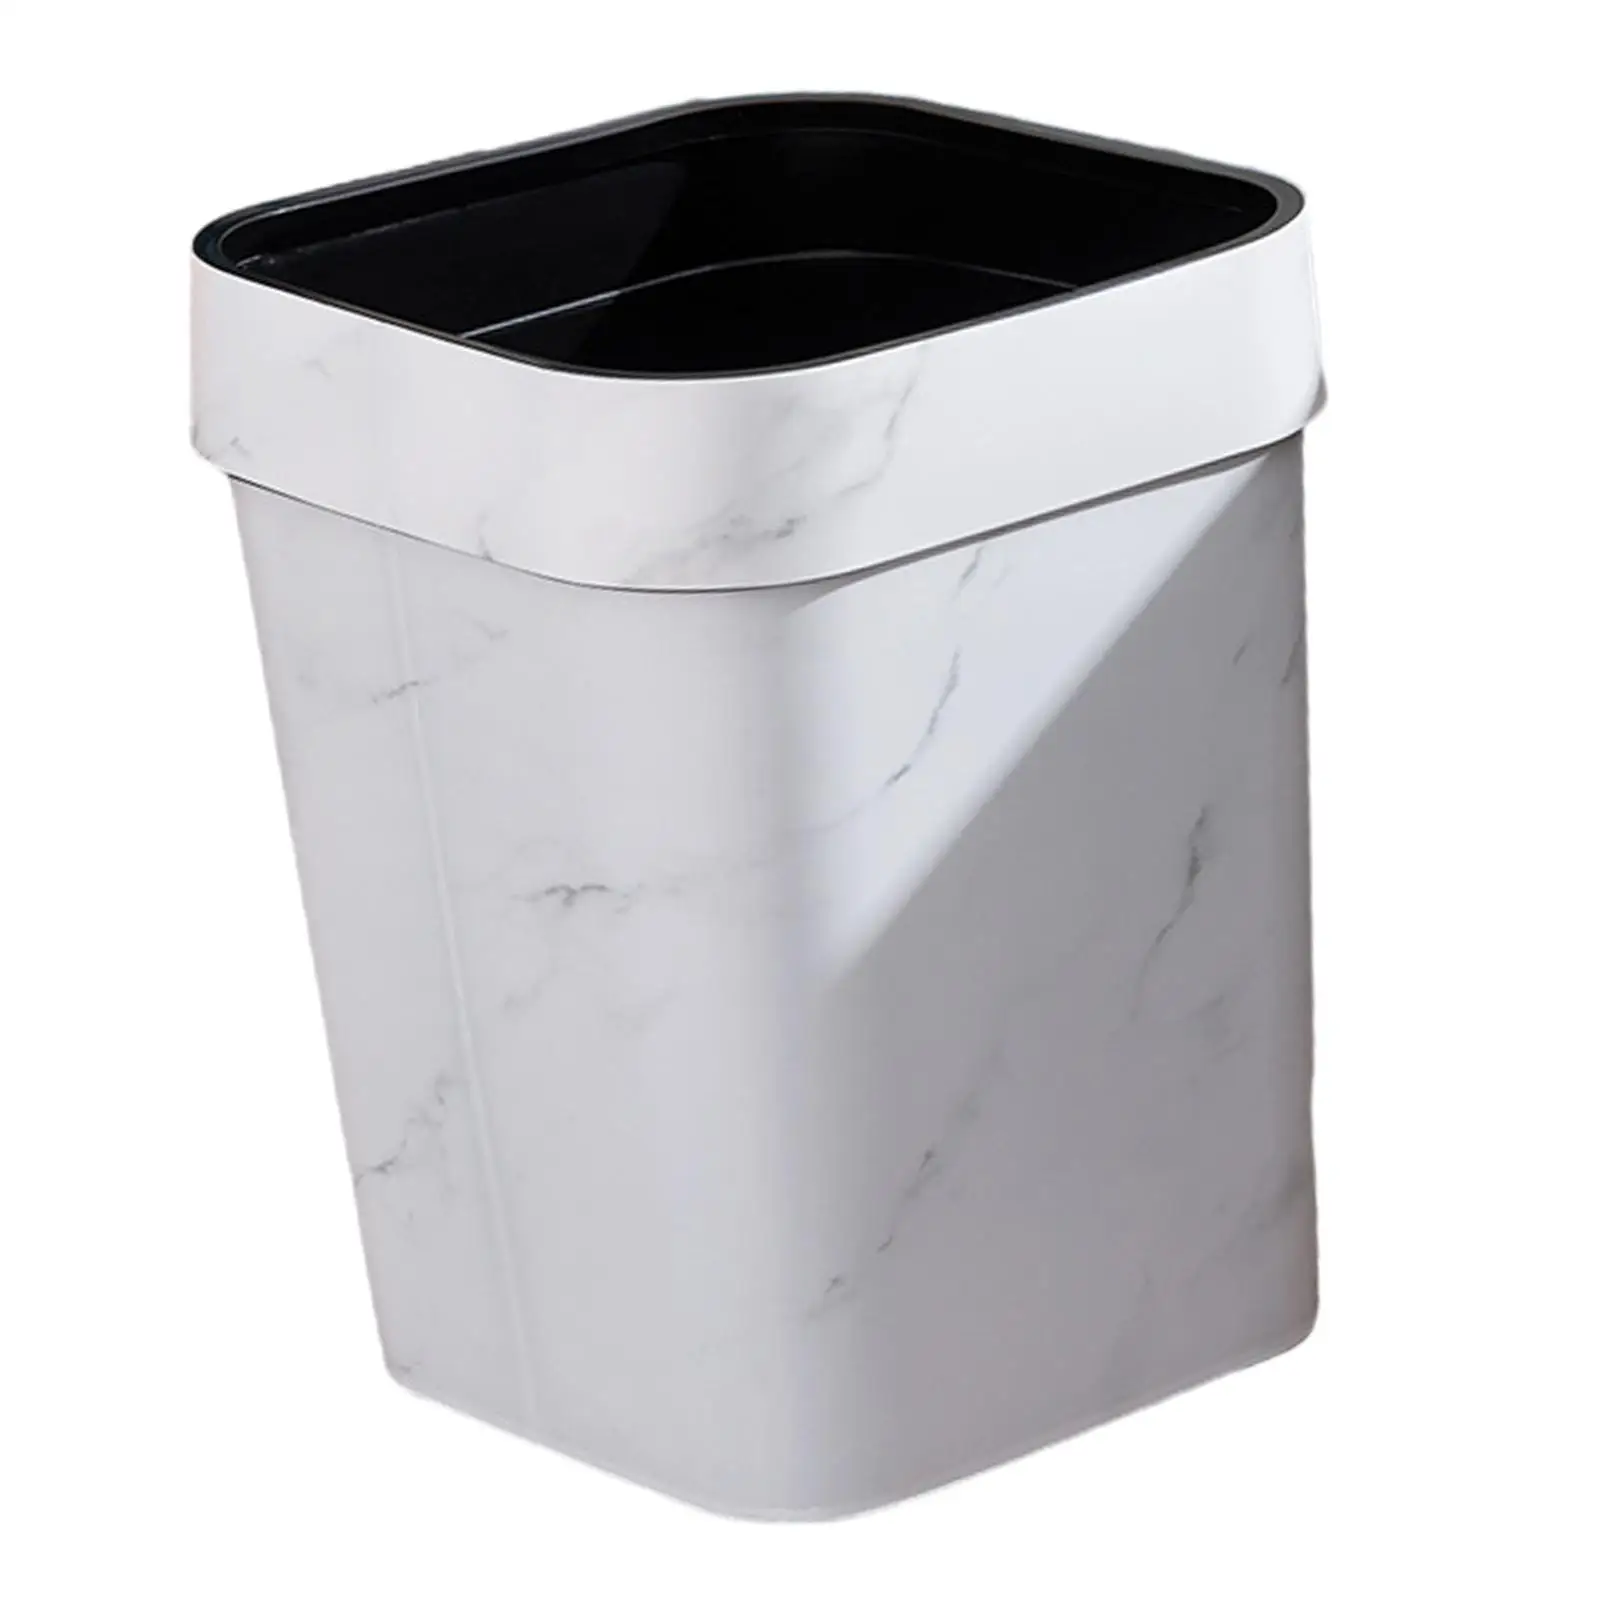 Small Trash Can Garbage Can Open Mouth Square 14L Trash Bin Rubbish Bin for Toilet Dorms Bedroom Office Kitchen